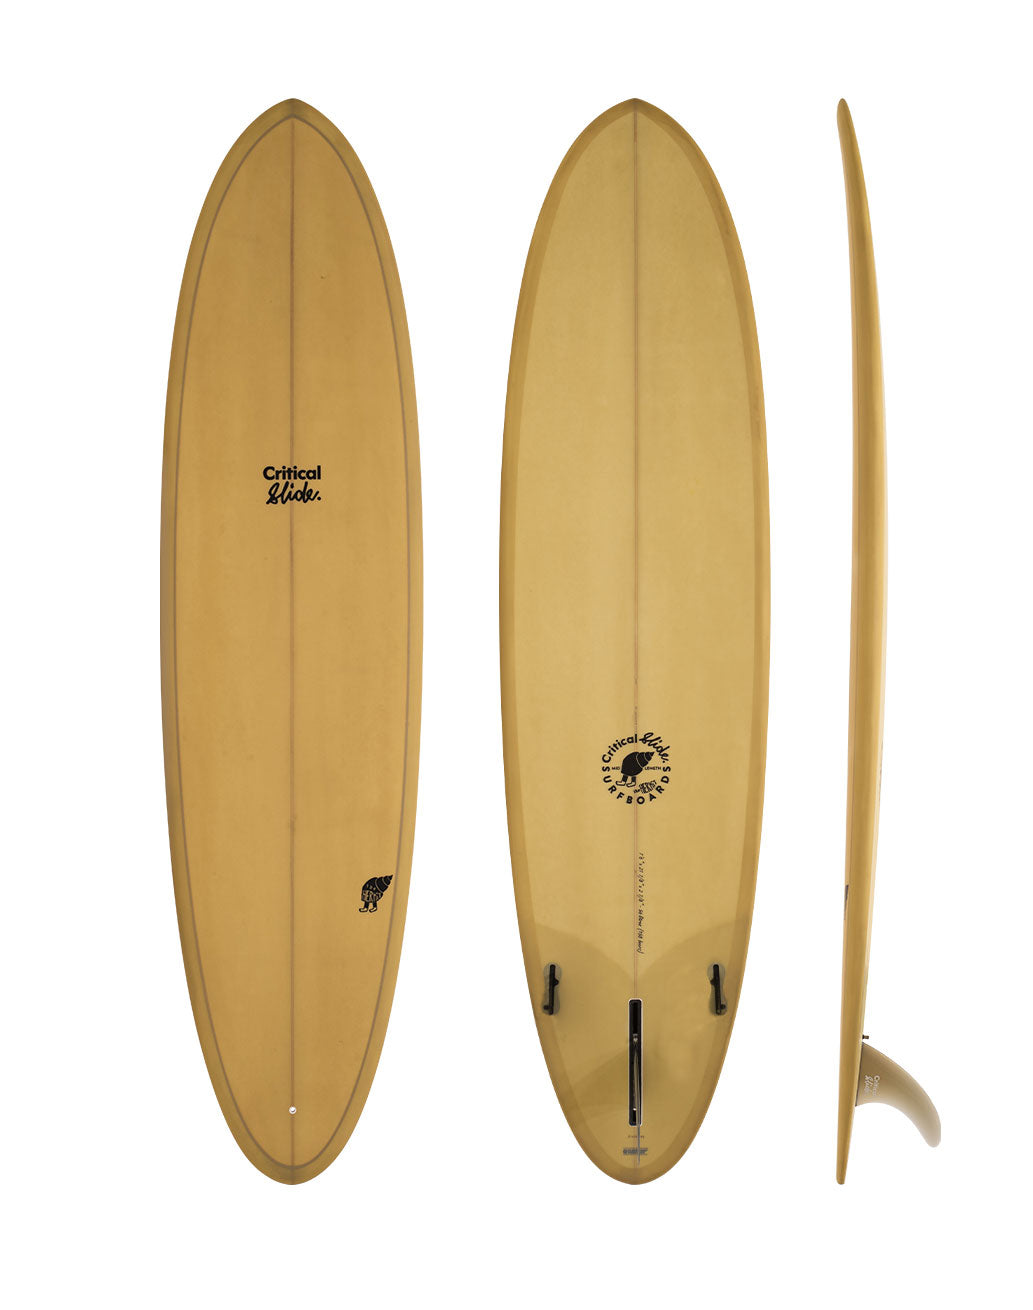 The Critical Slide Society Surfboards - The Hermit - straw yellow coloured mid length surfboard